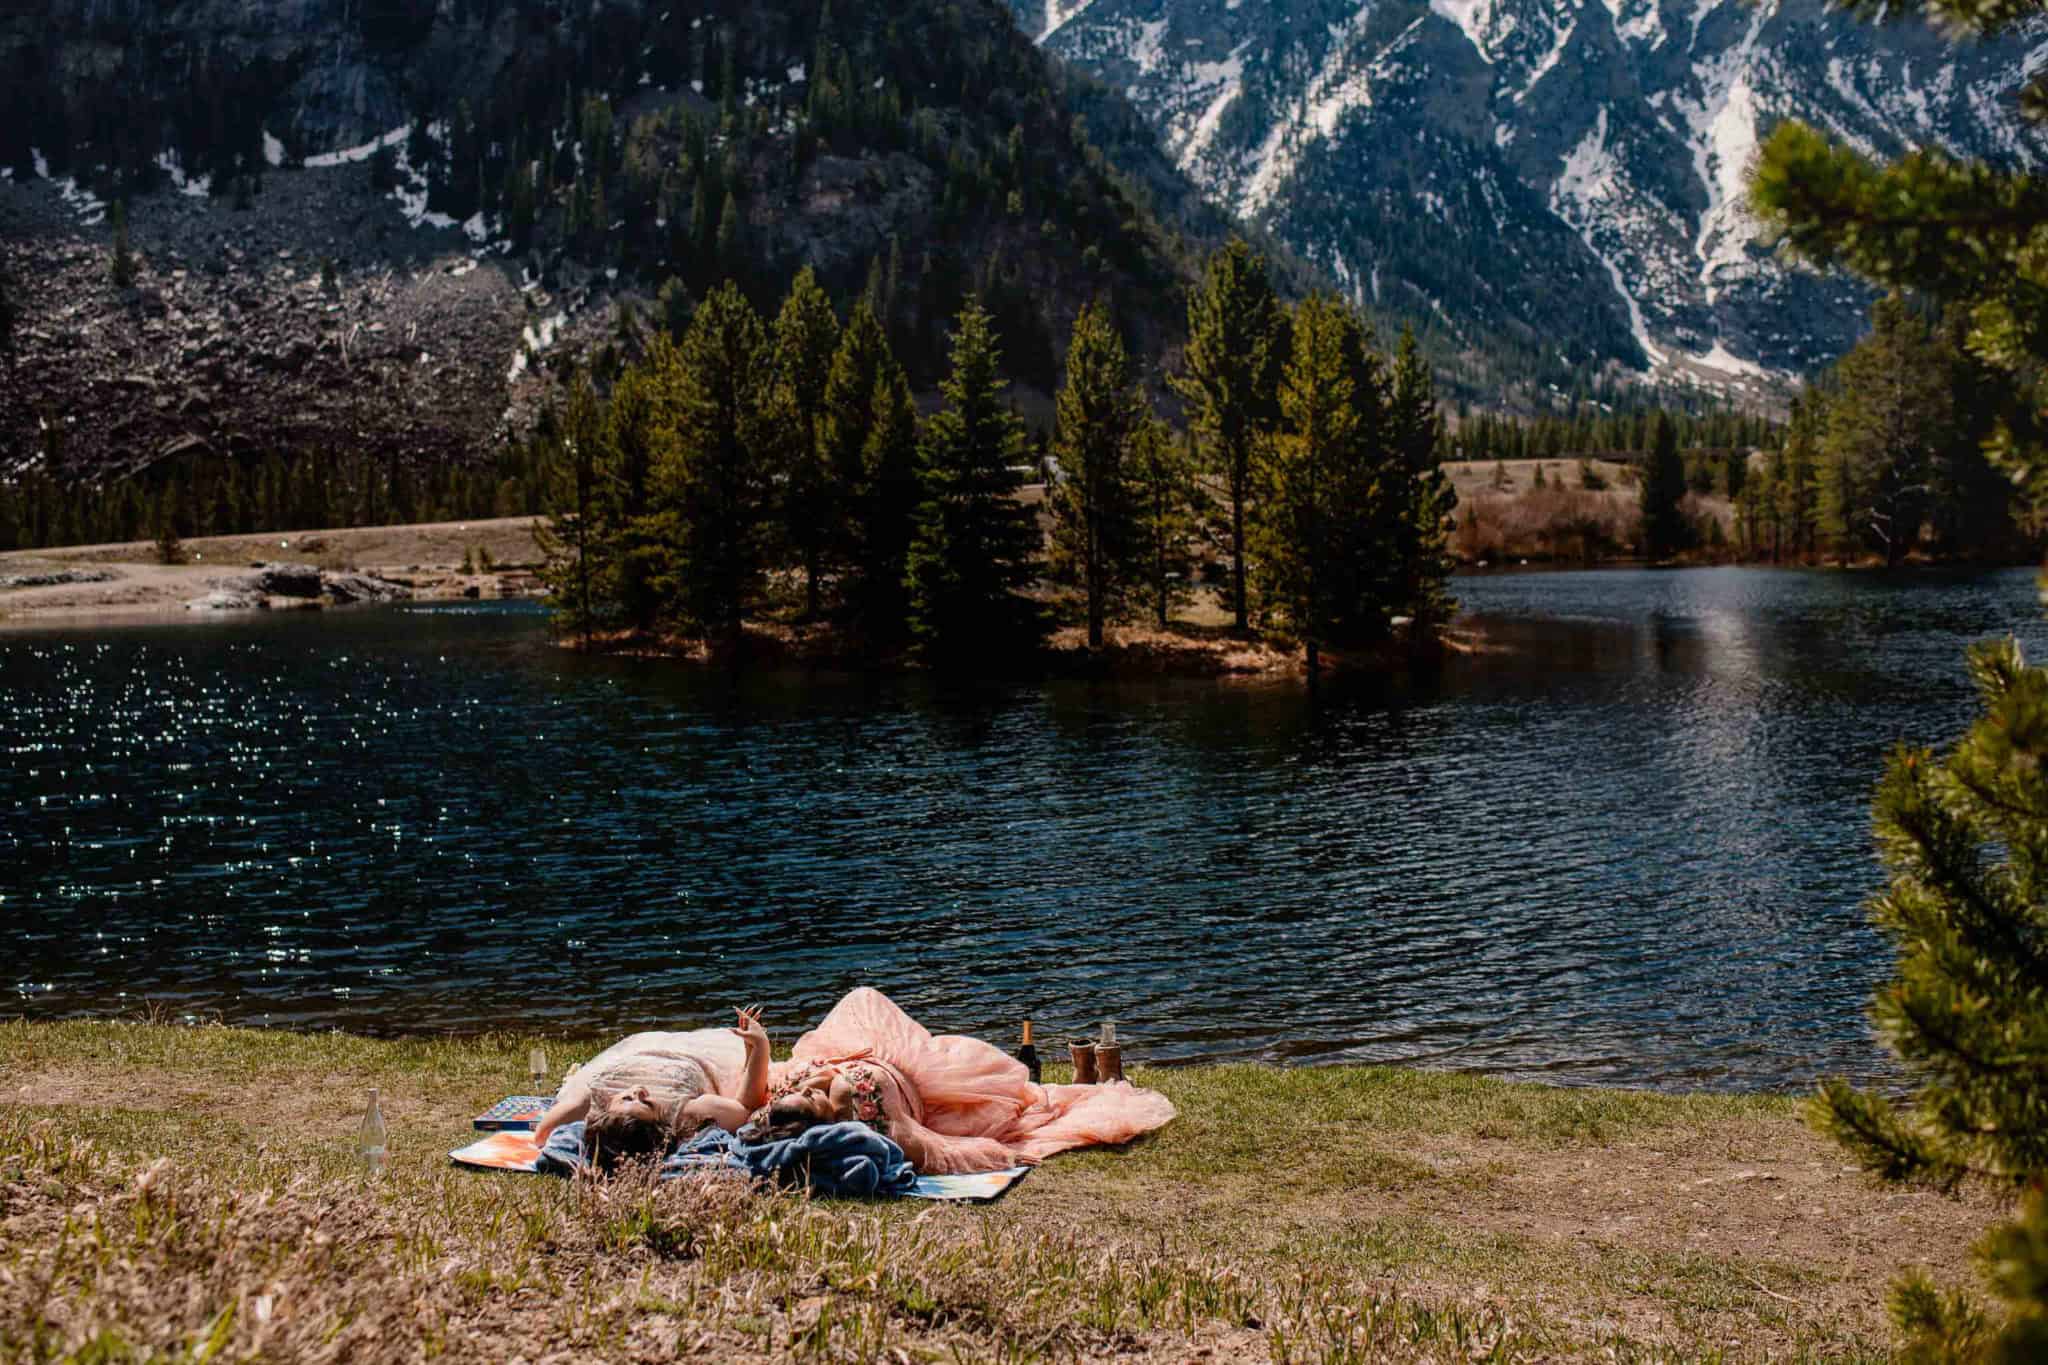 couple sitting on a blanket enjoying a romantic wedding day picnic with mountains in the background